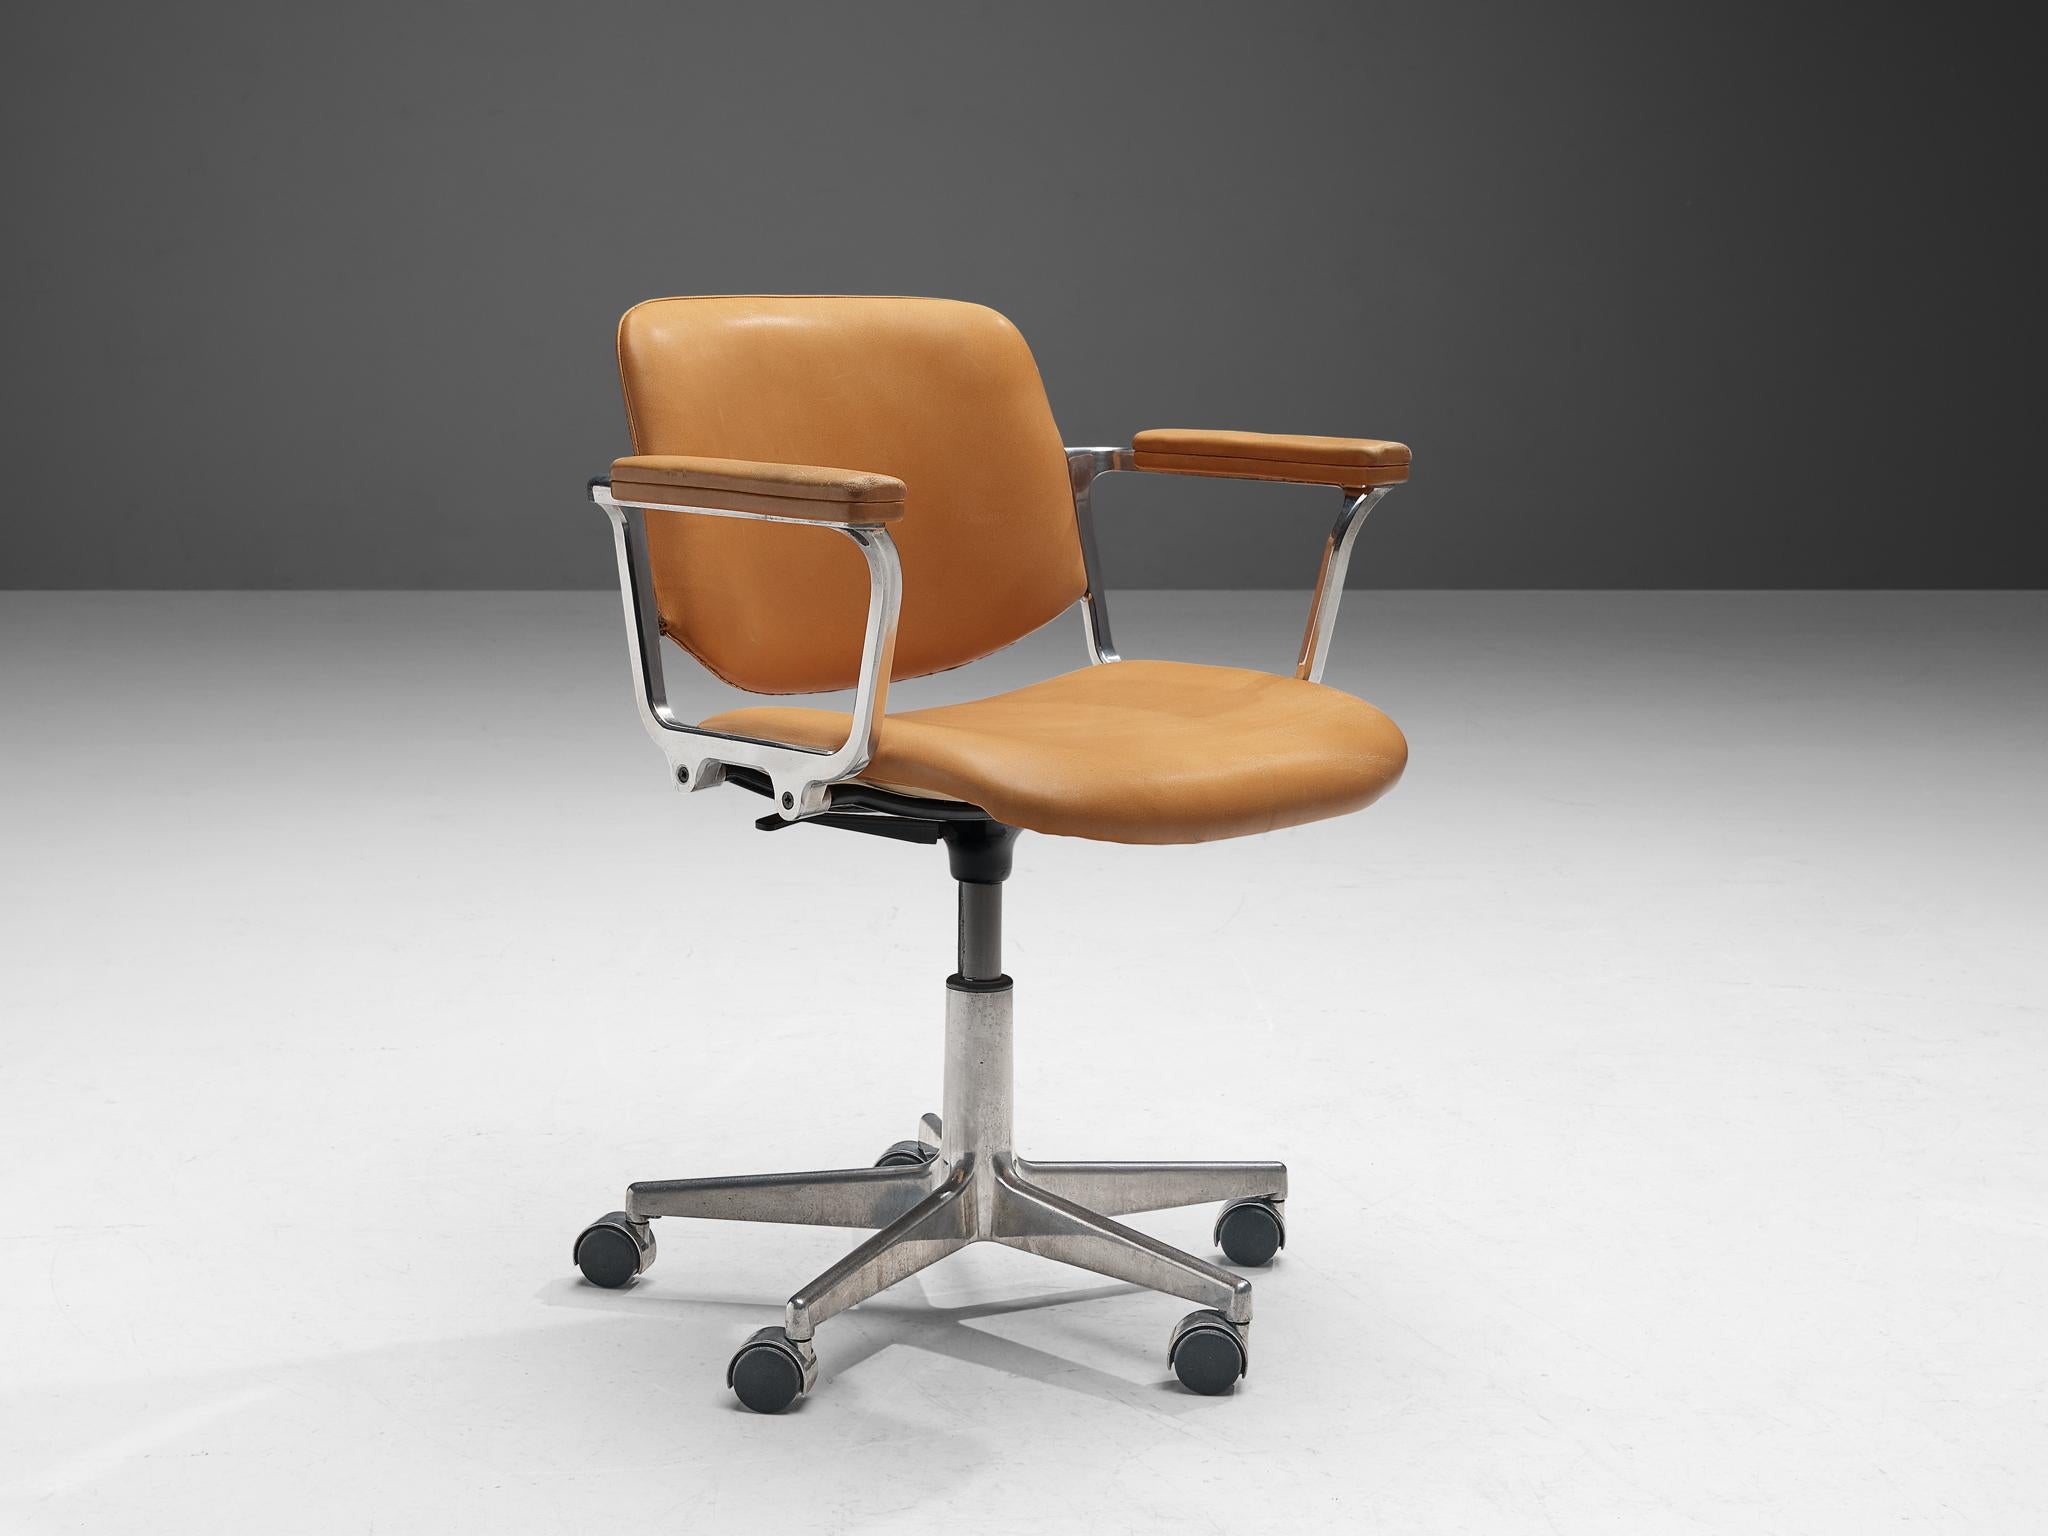 Swivel desk chair, metal, plastic, leather, Italy, 1960s

Italian swivel desk chair in the manner of Ico Parisi's desk chair for MIM. Seating and back are slightly curved and both halves are mirrored creating a vibrant character. The chair has a